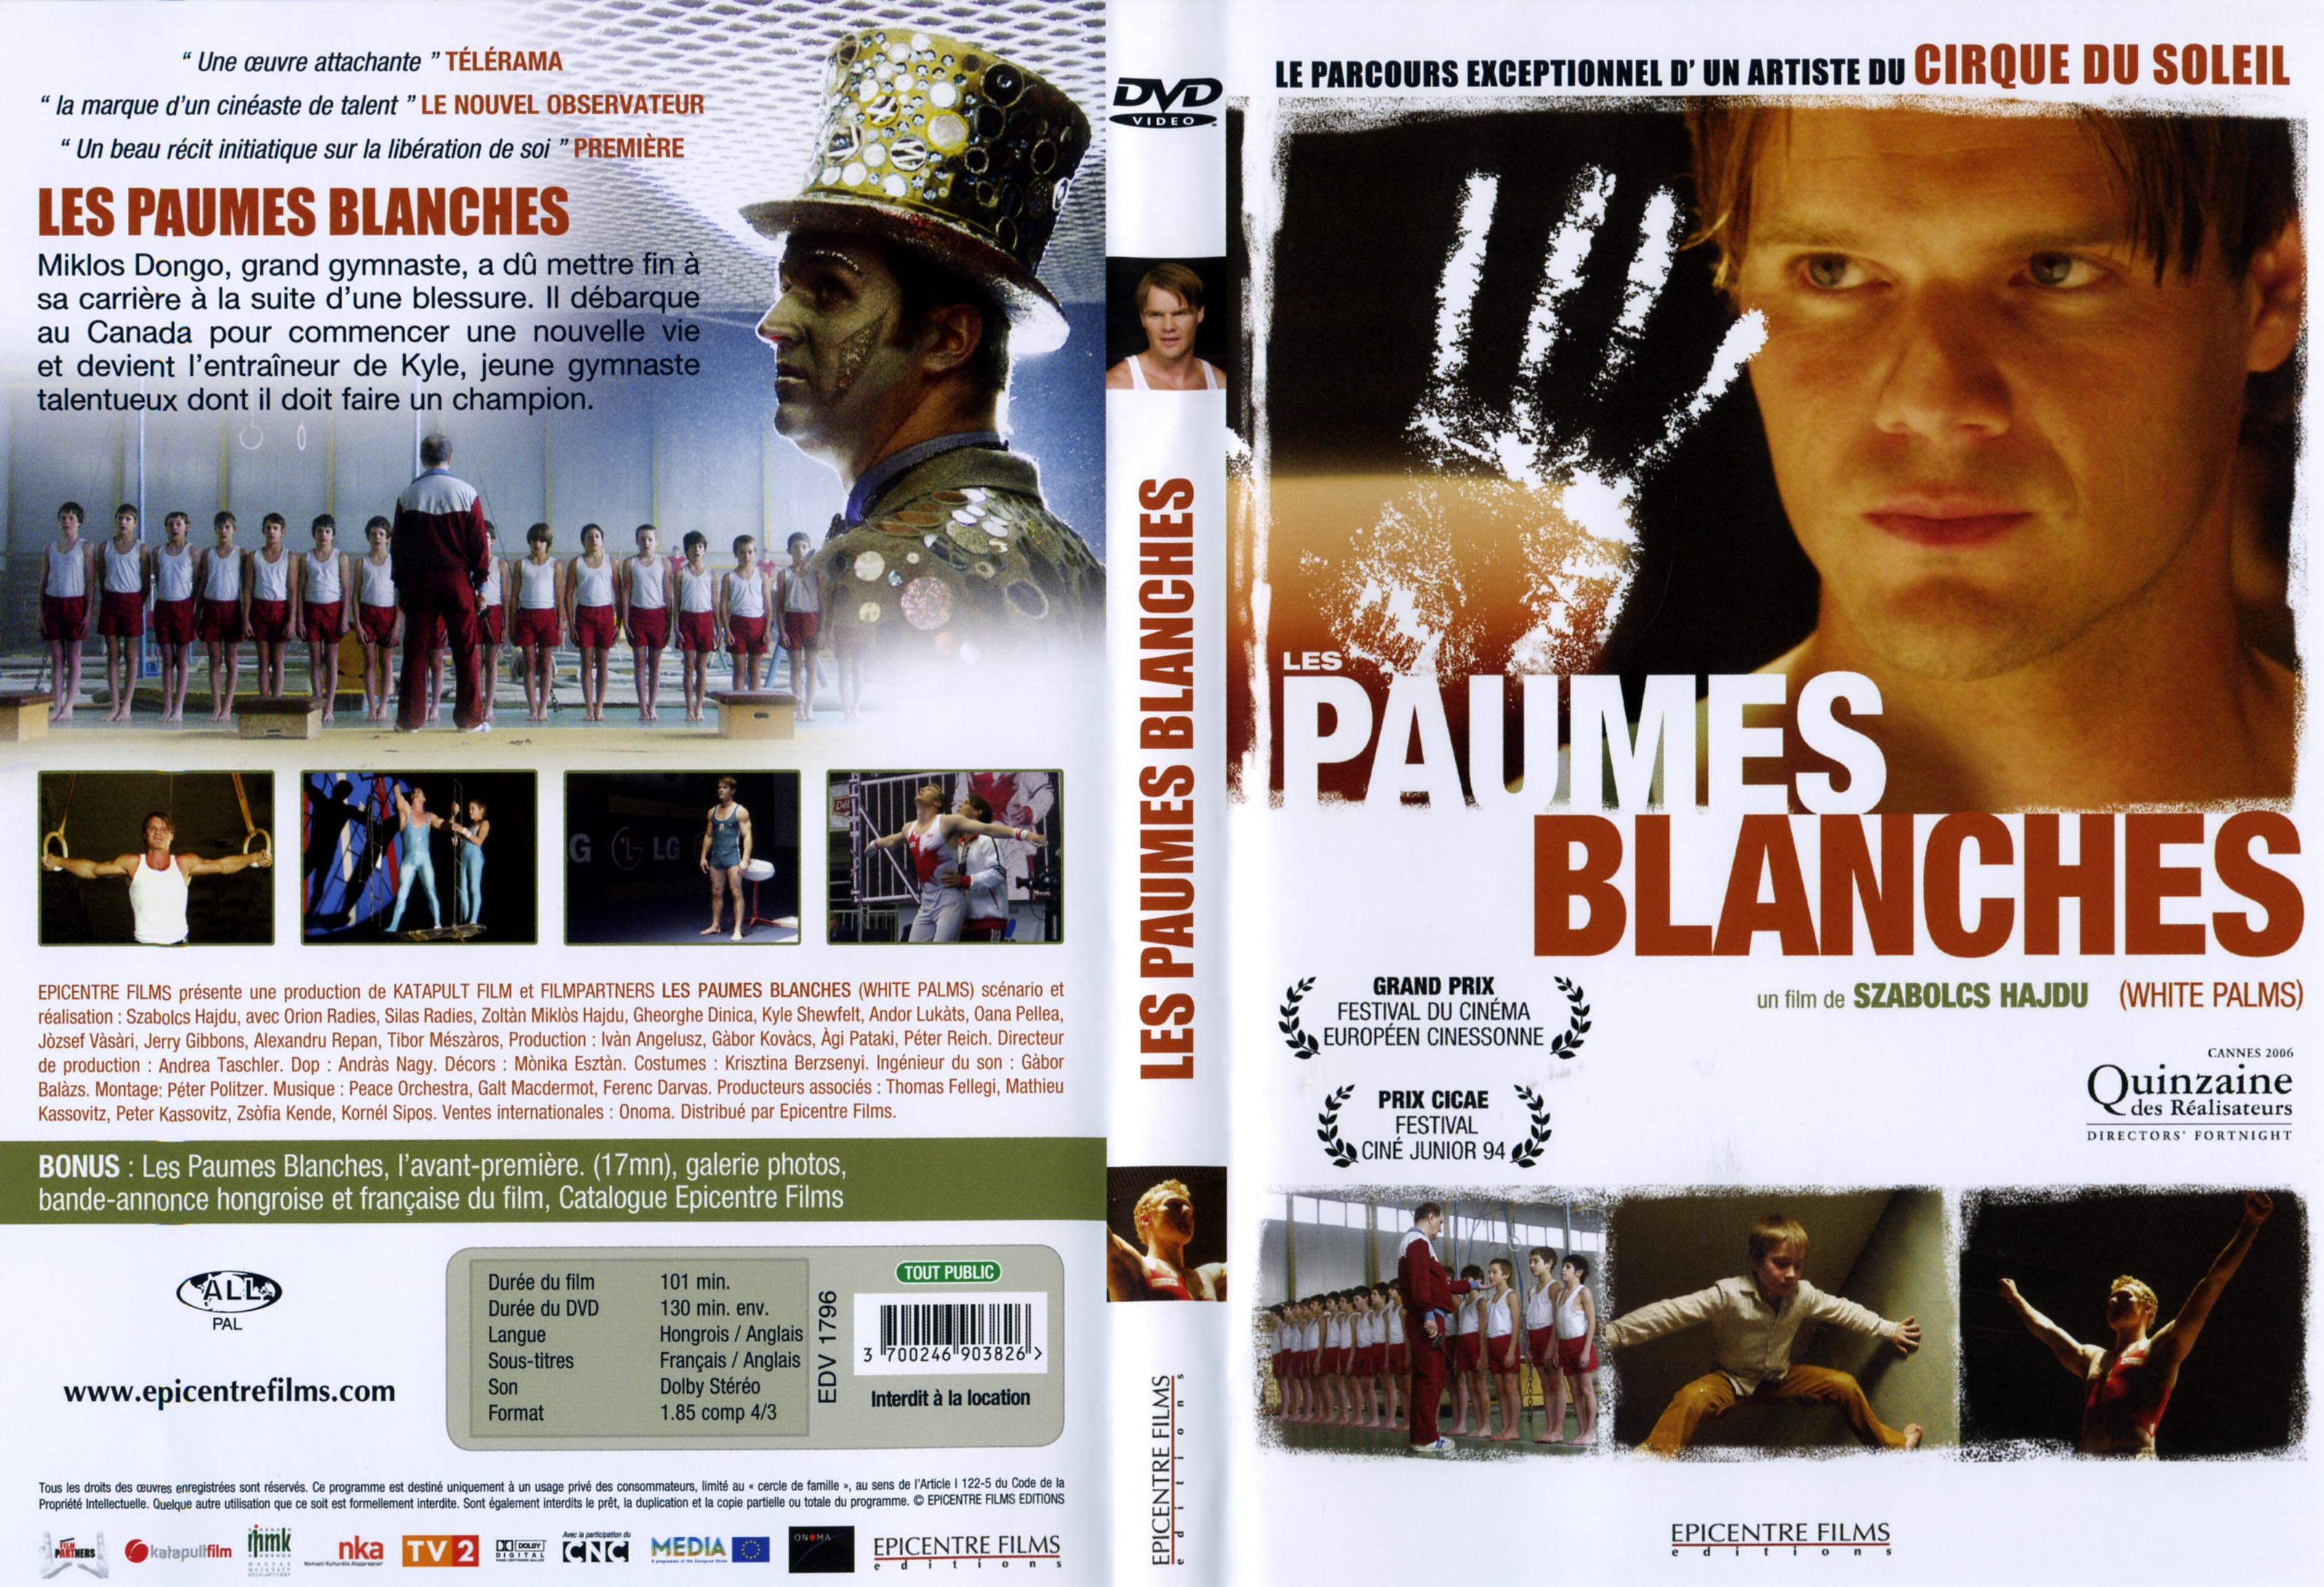 Jaquette DVD Les Paumes blanches